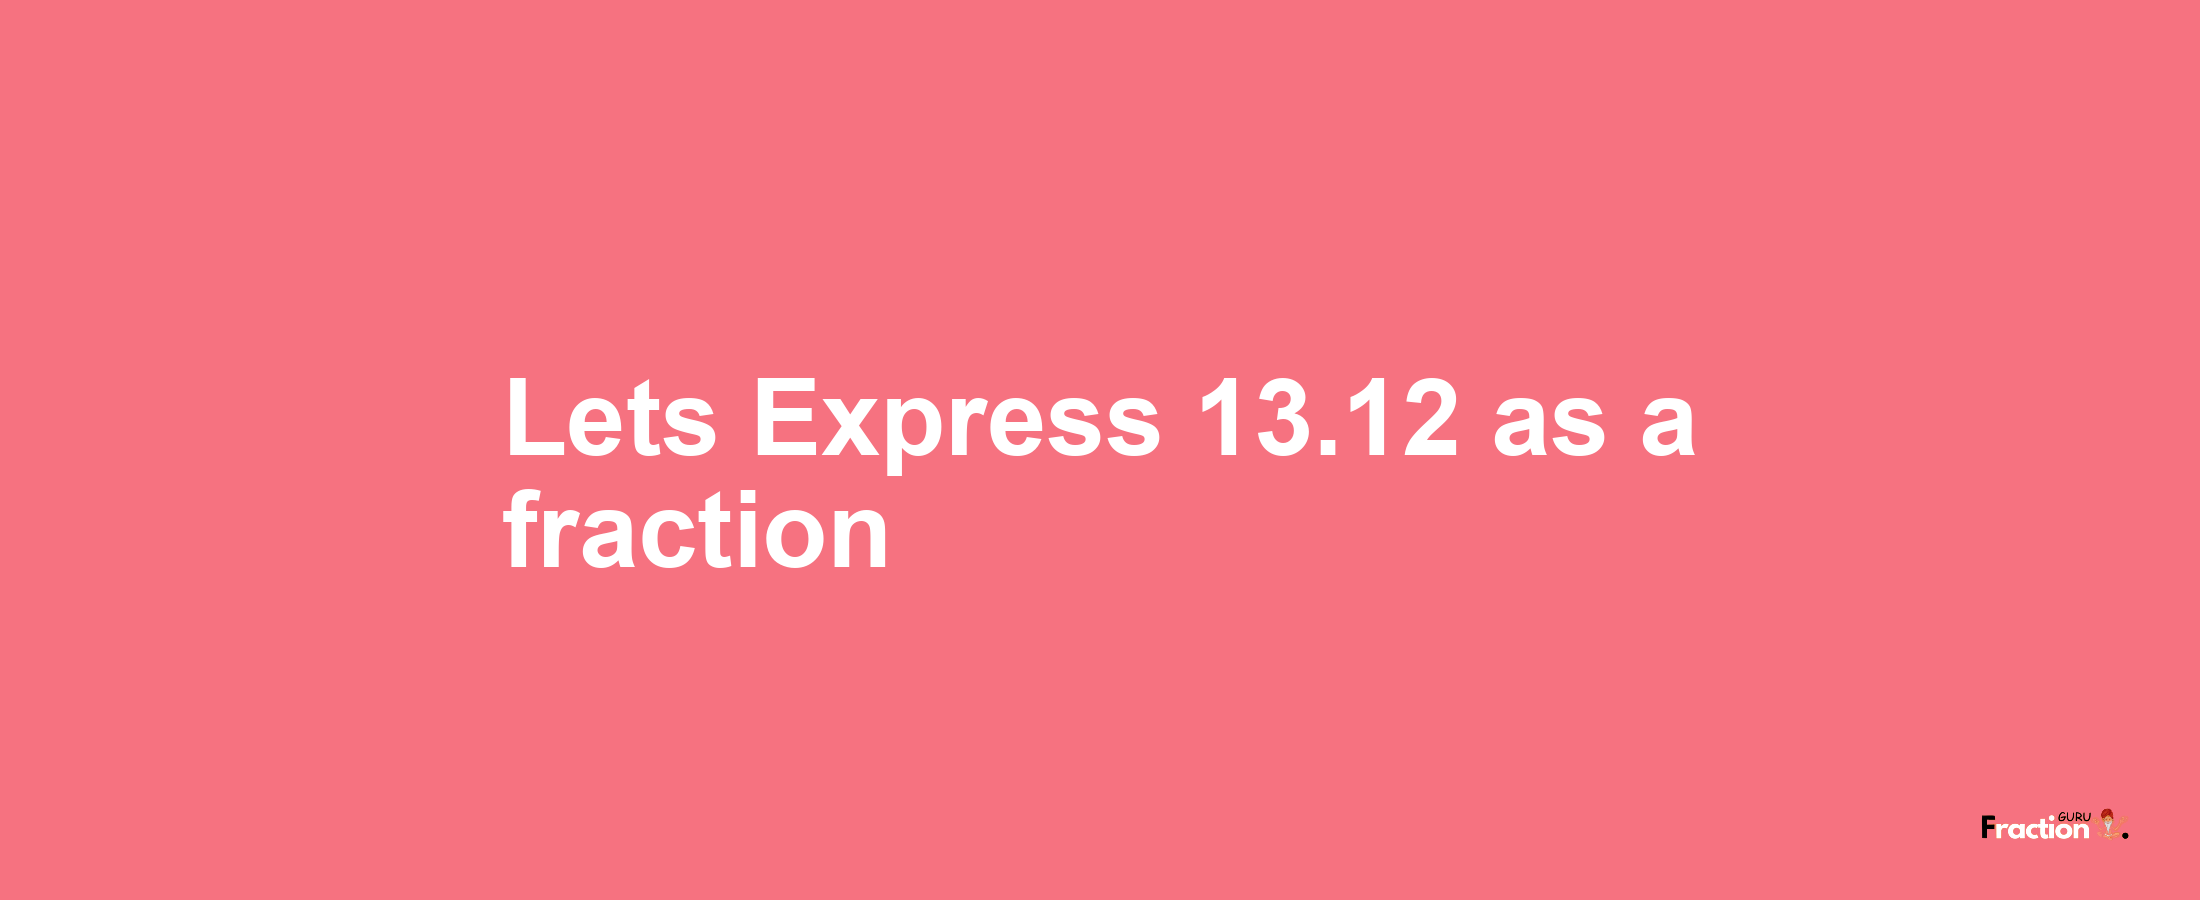 Lets Express 13.12 as afraction